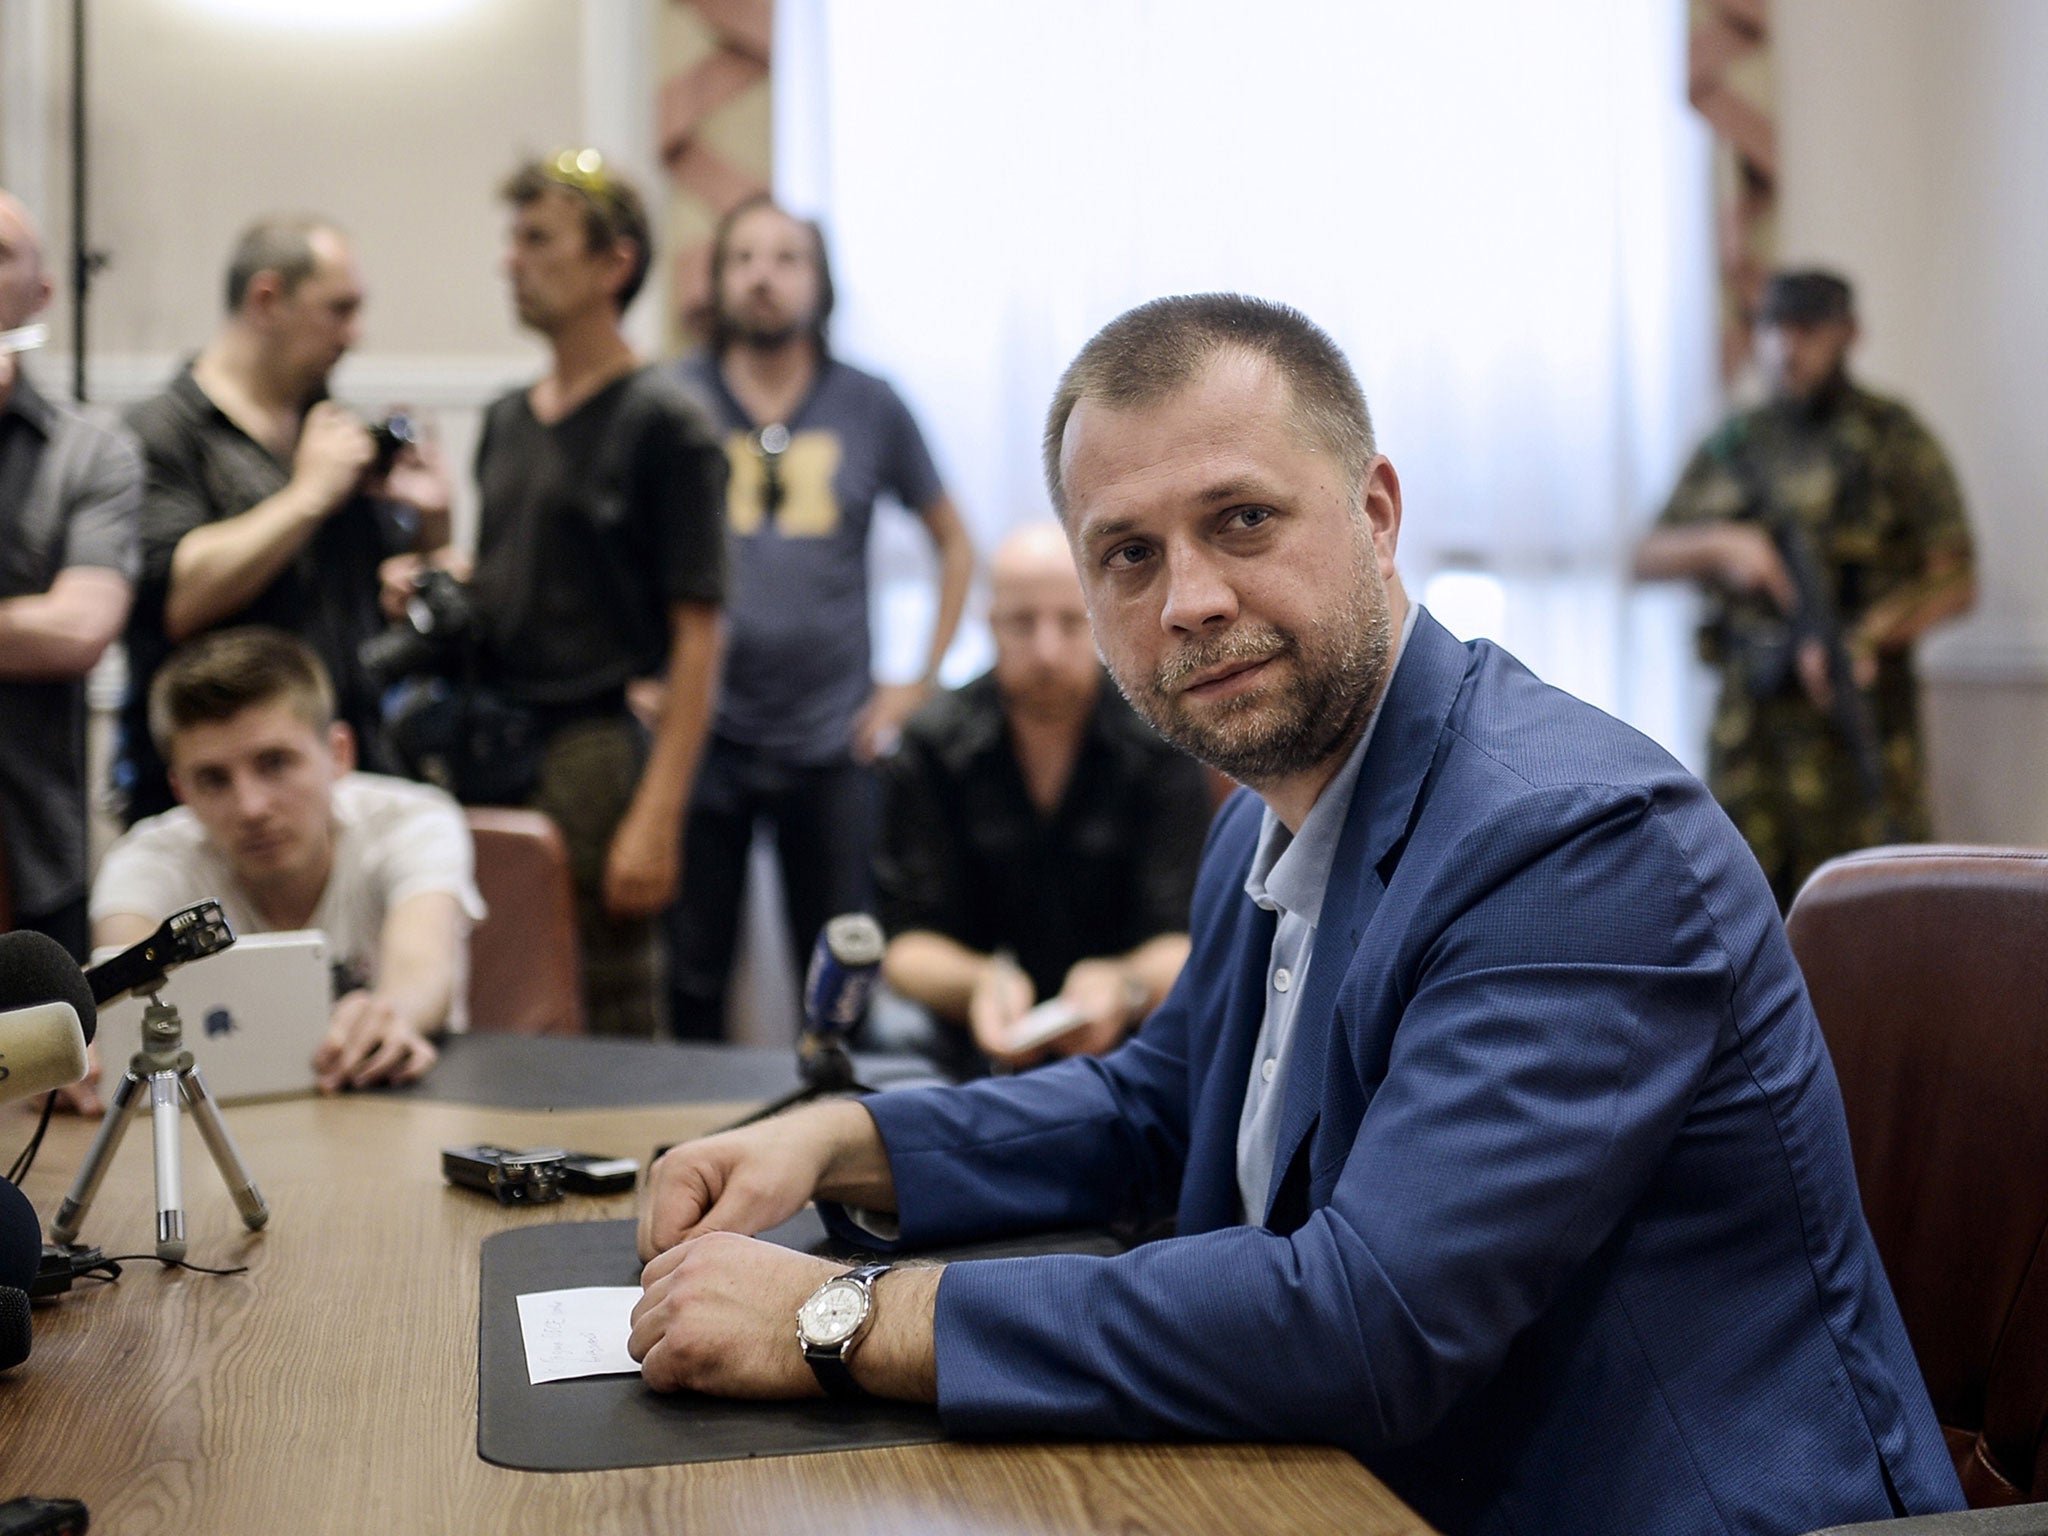 Self-proclaimed Prime Minister of the pro- Russian separatist “Donetsk People’s